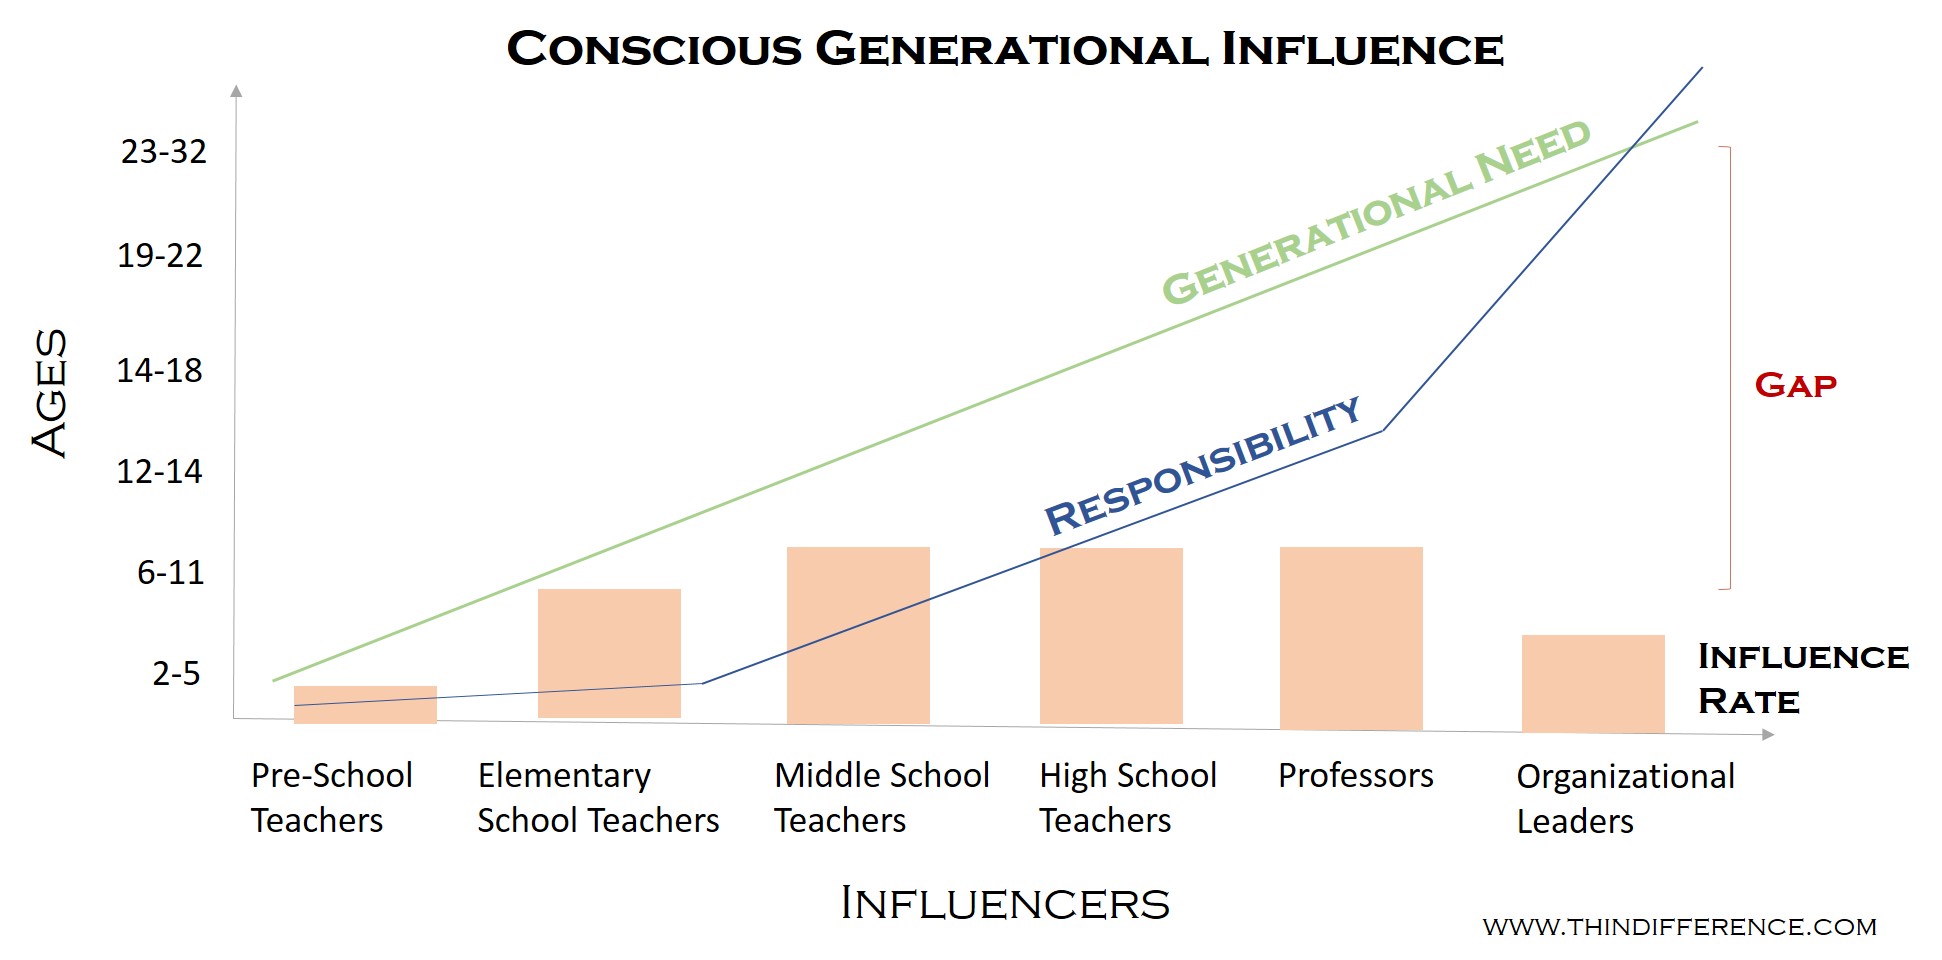 generations - conscious influence